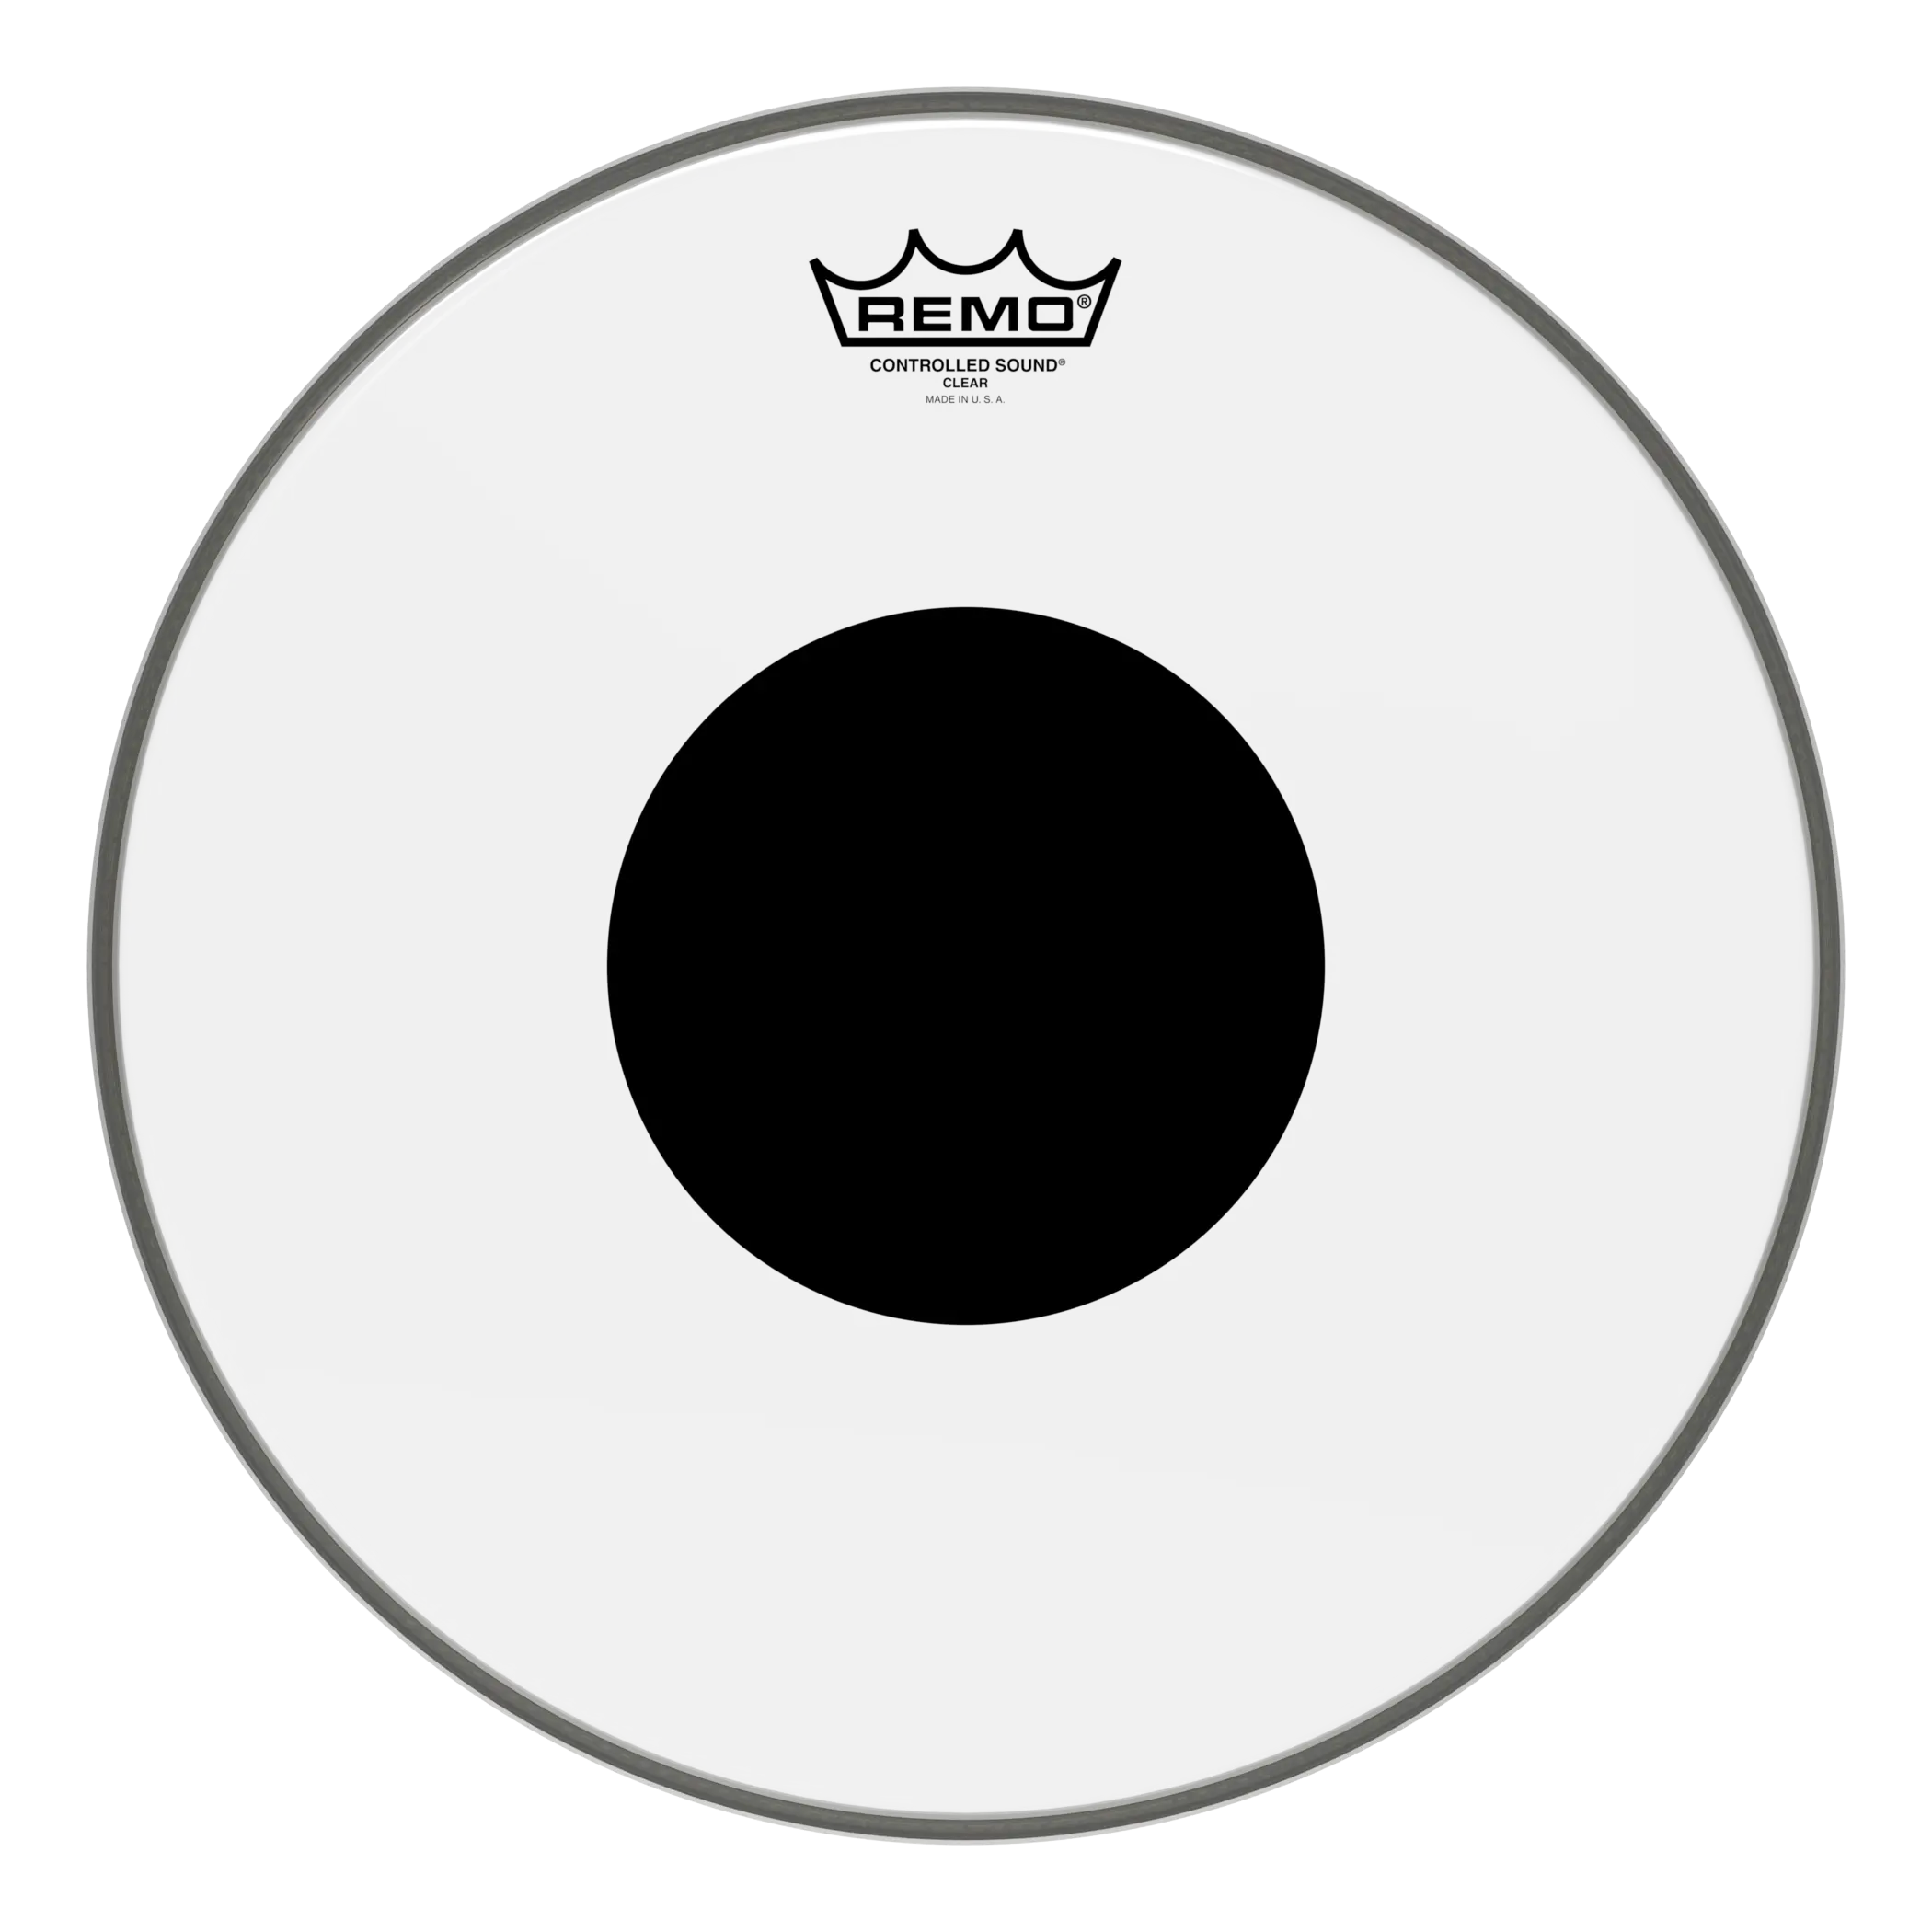 Remo 16" Controlled Sound Black Dot Clear Drumhead